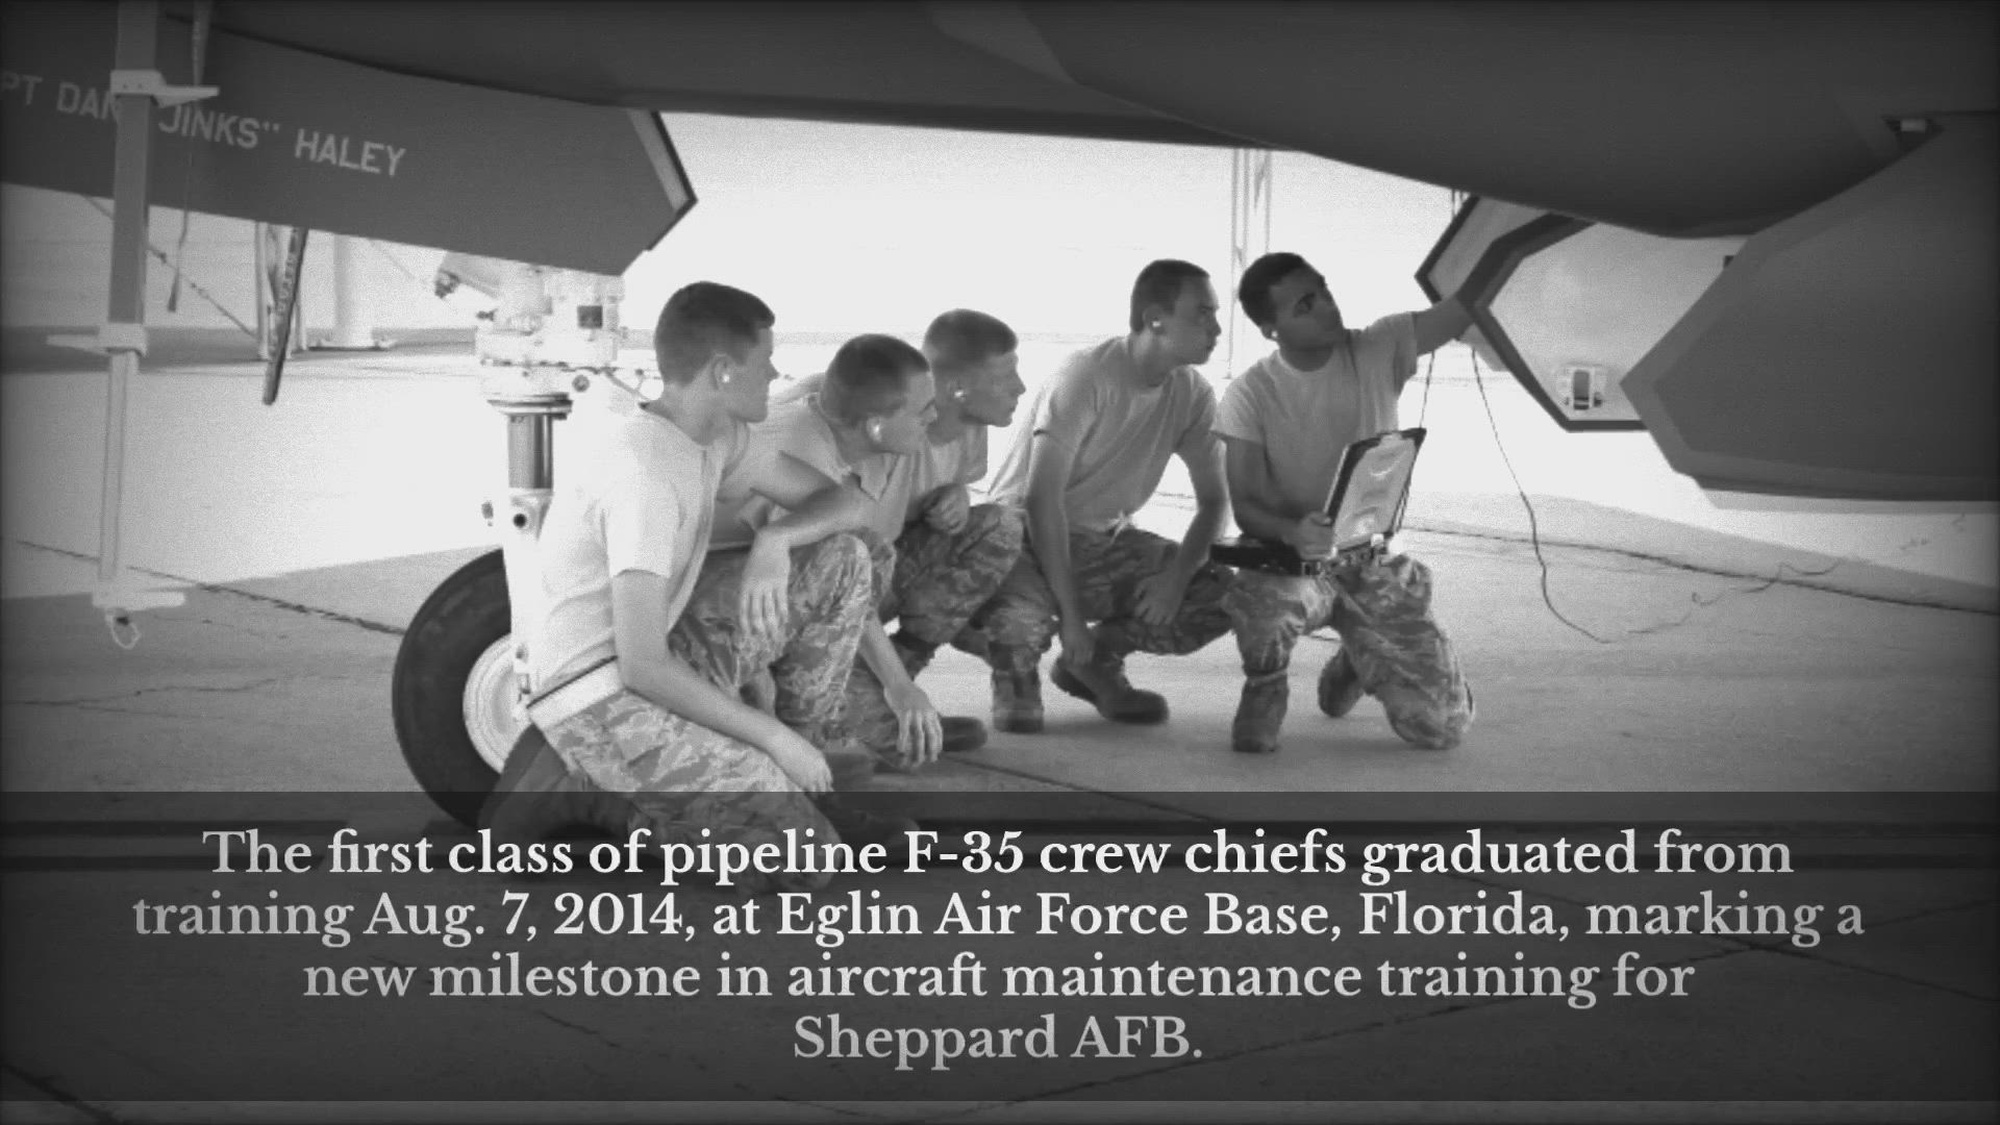 A weekly look at significant events during the 80-year history of Sheppard Air Force Base, Texas.